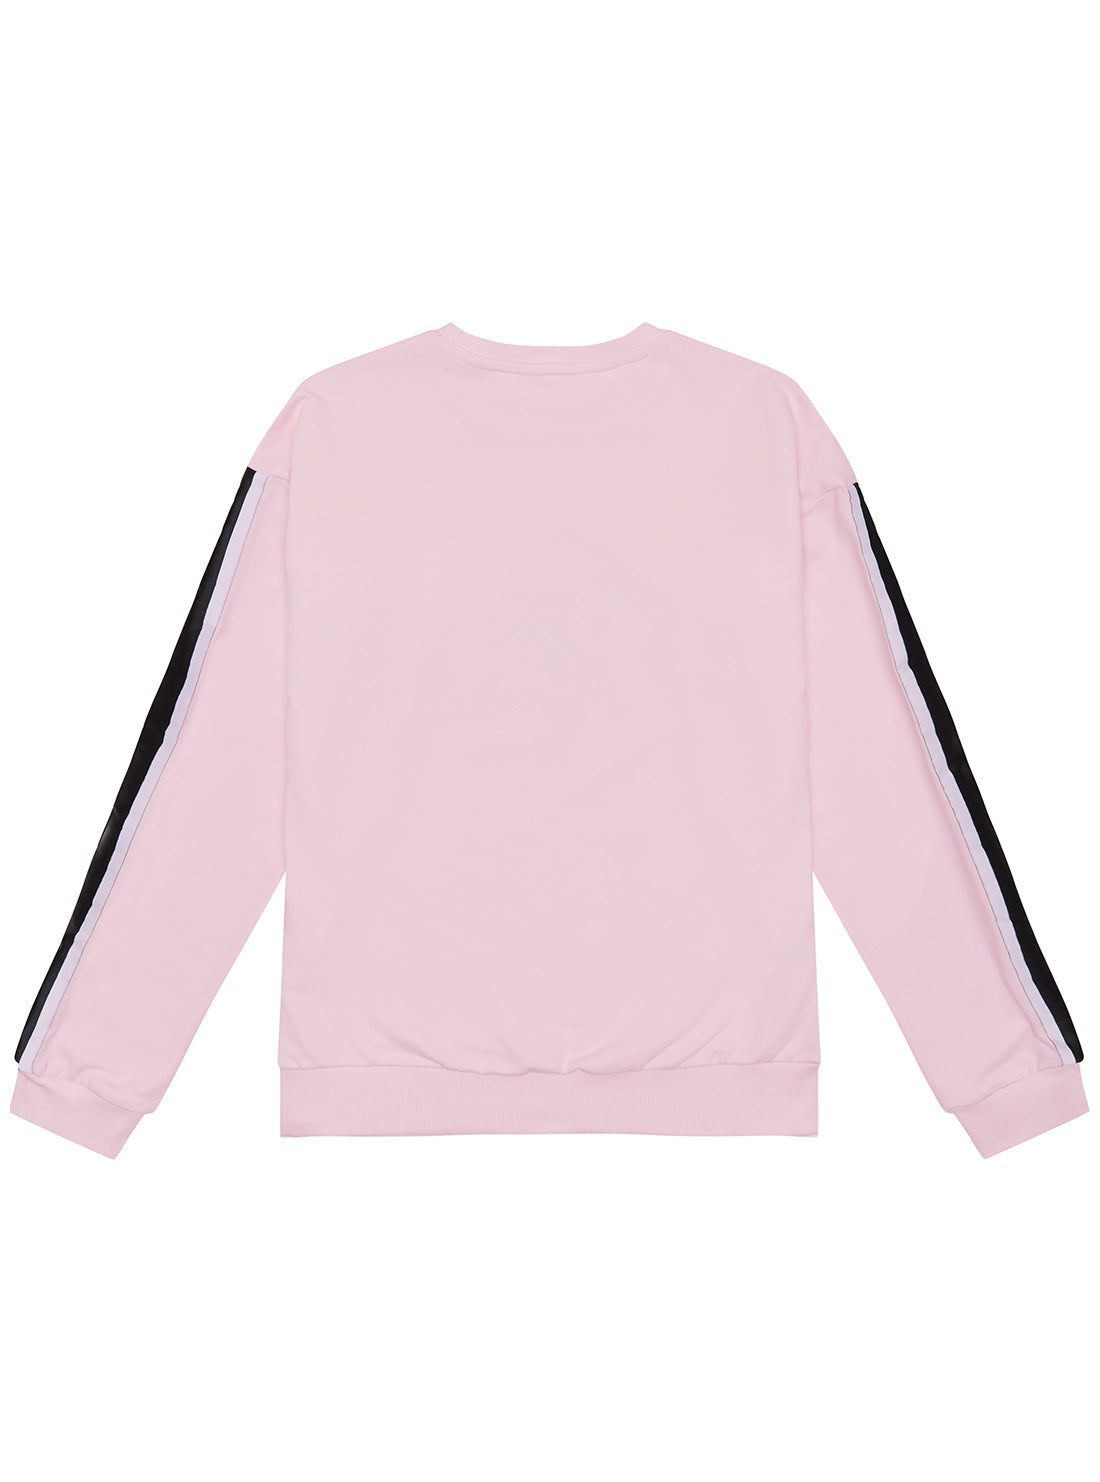 GUESS GUESS Pink Long Sleeve Jumper (7-16) back view